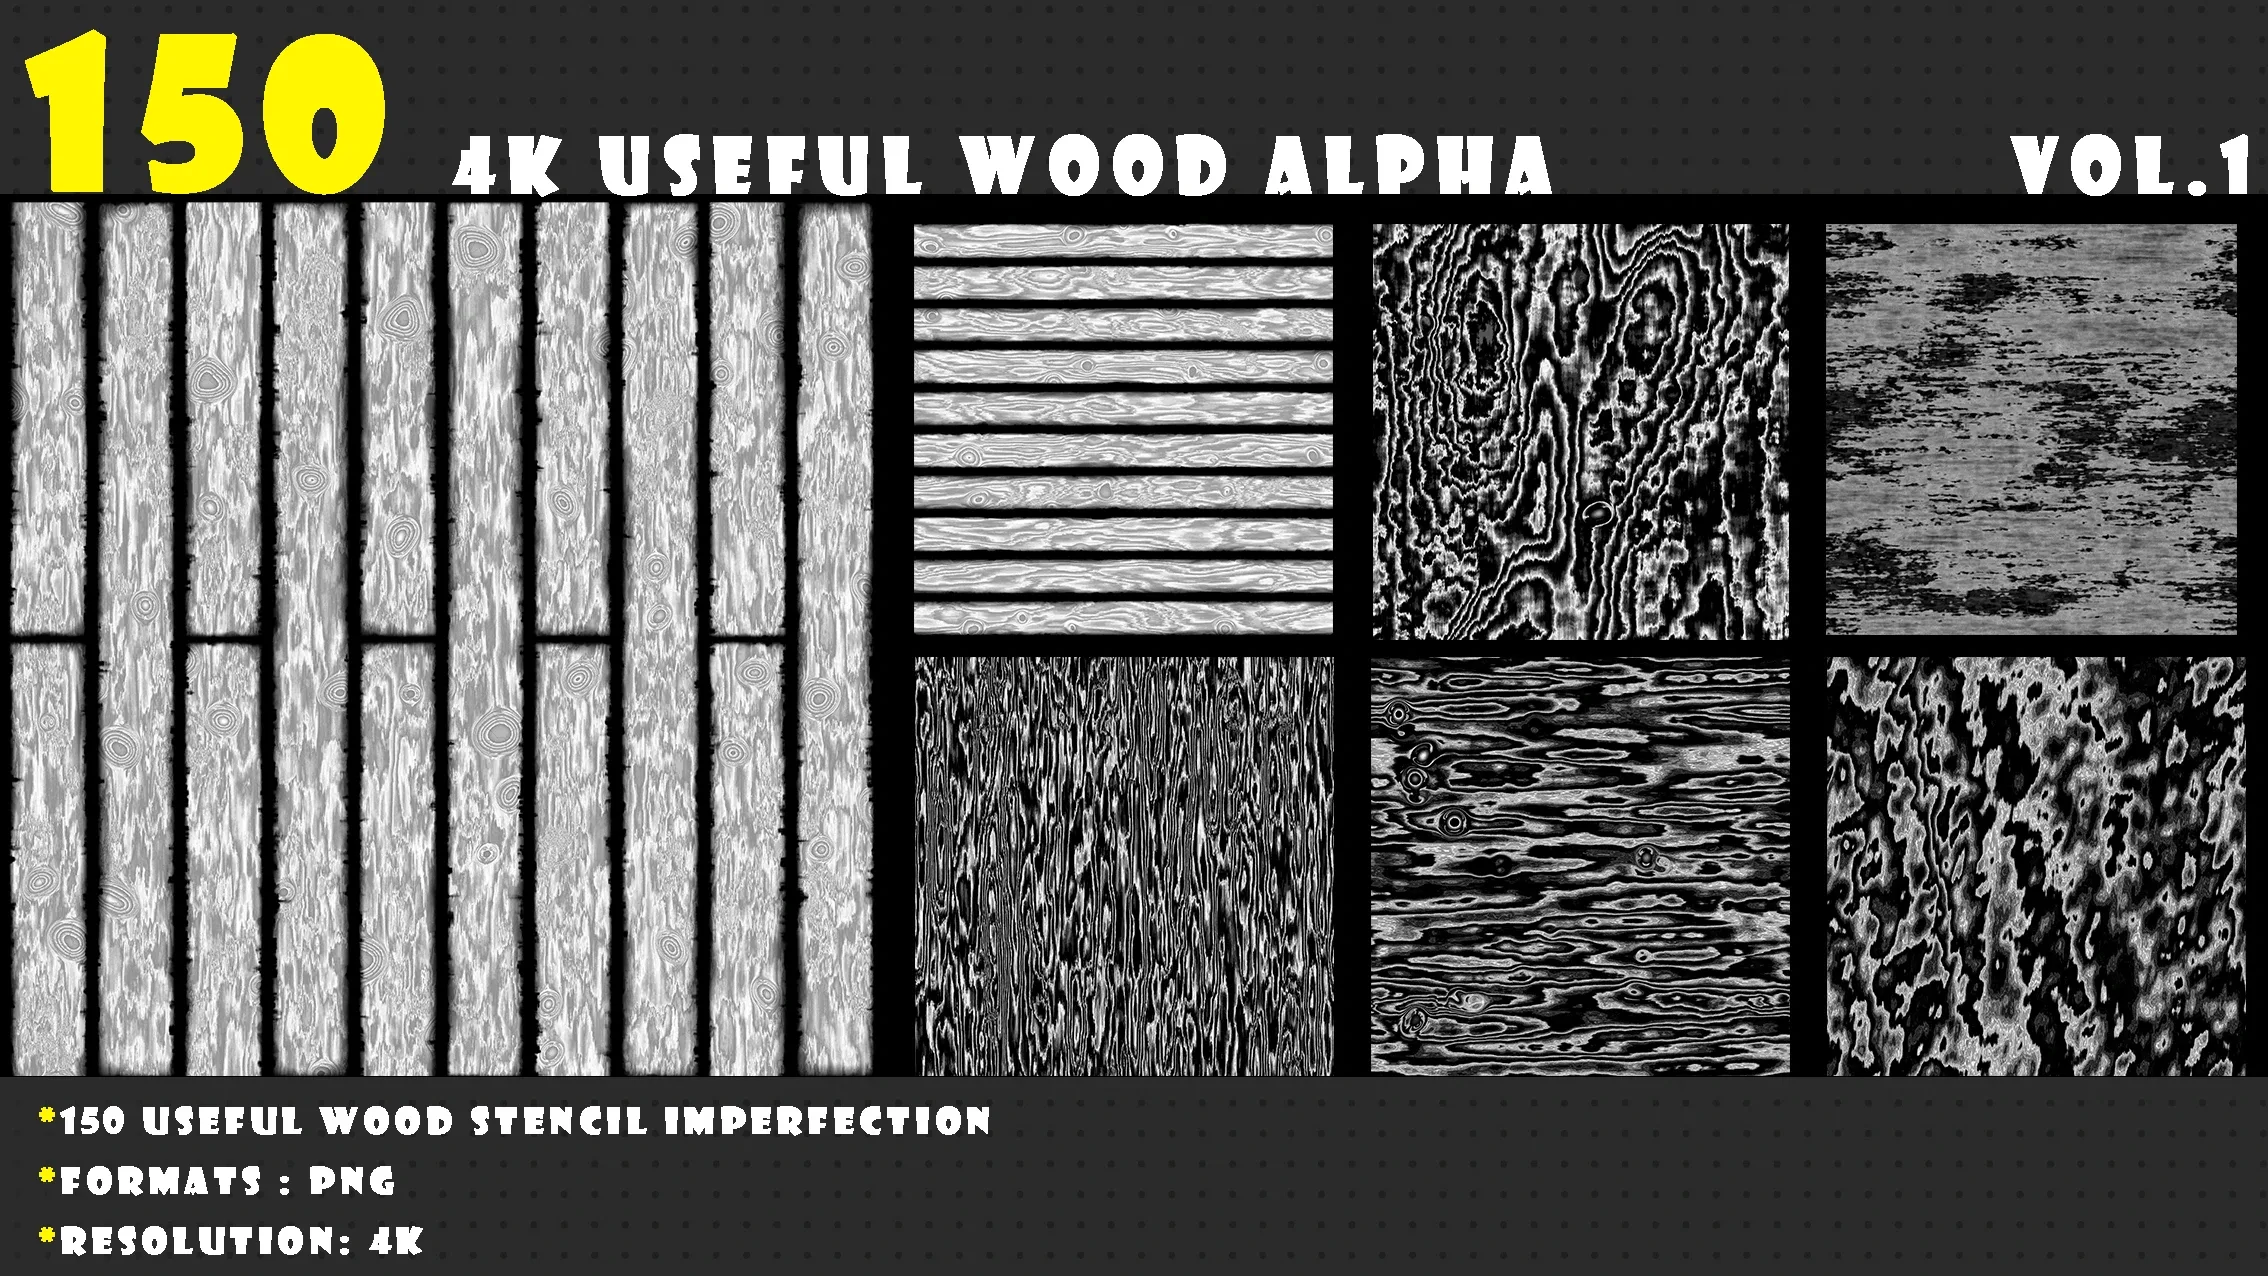 150 High Quality Useful Wood Stencil Imperfection vol.1